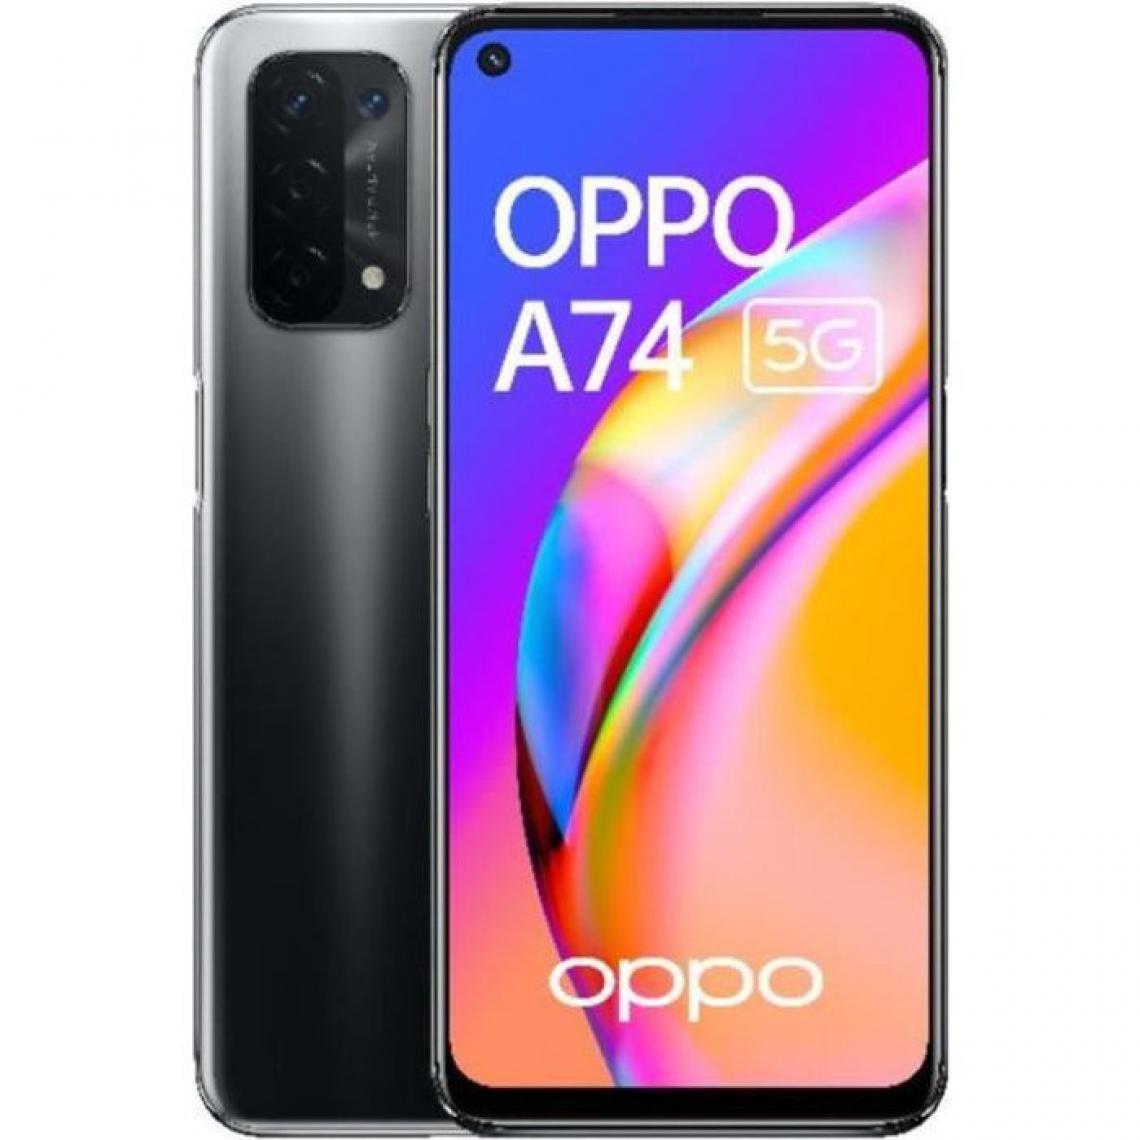 Oppo - OPPO A74 5G 128Go Noir - Smartphone Android